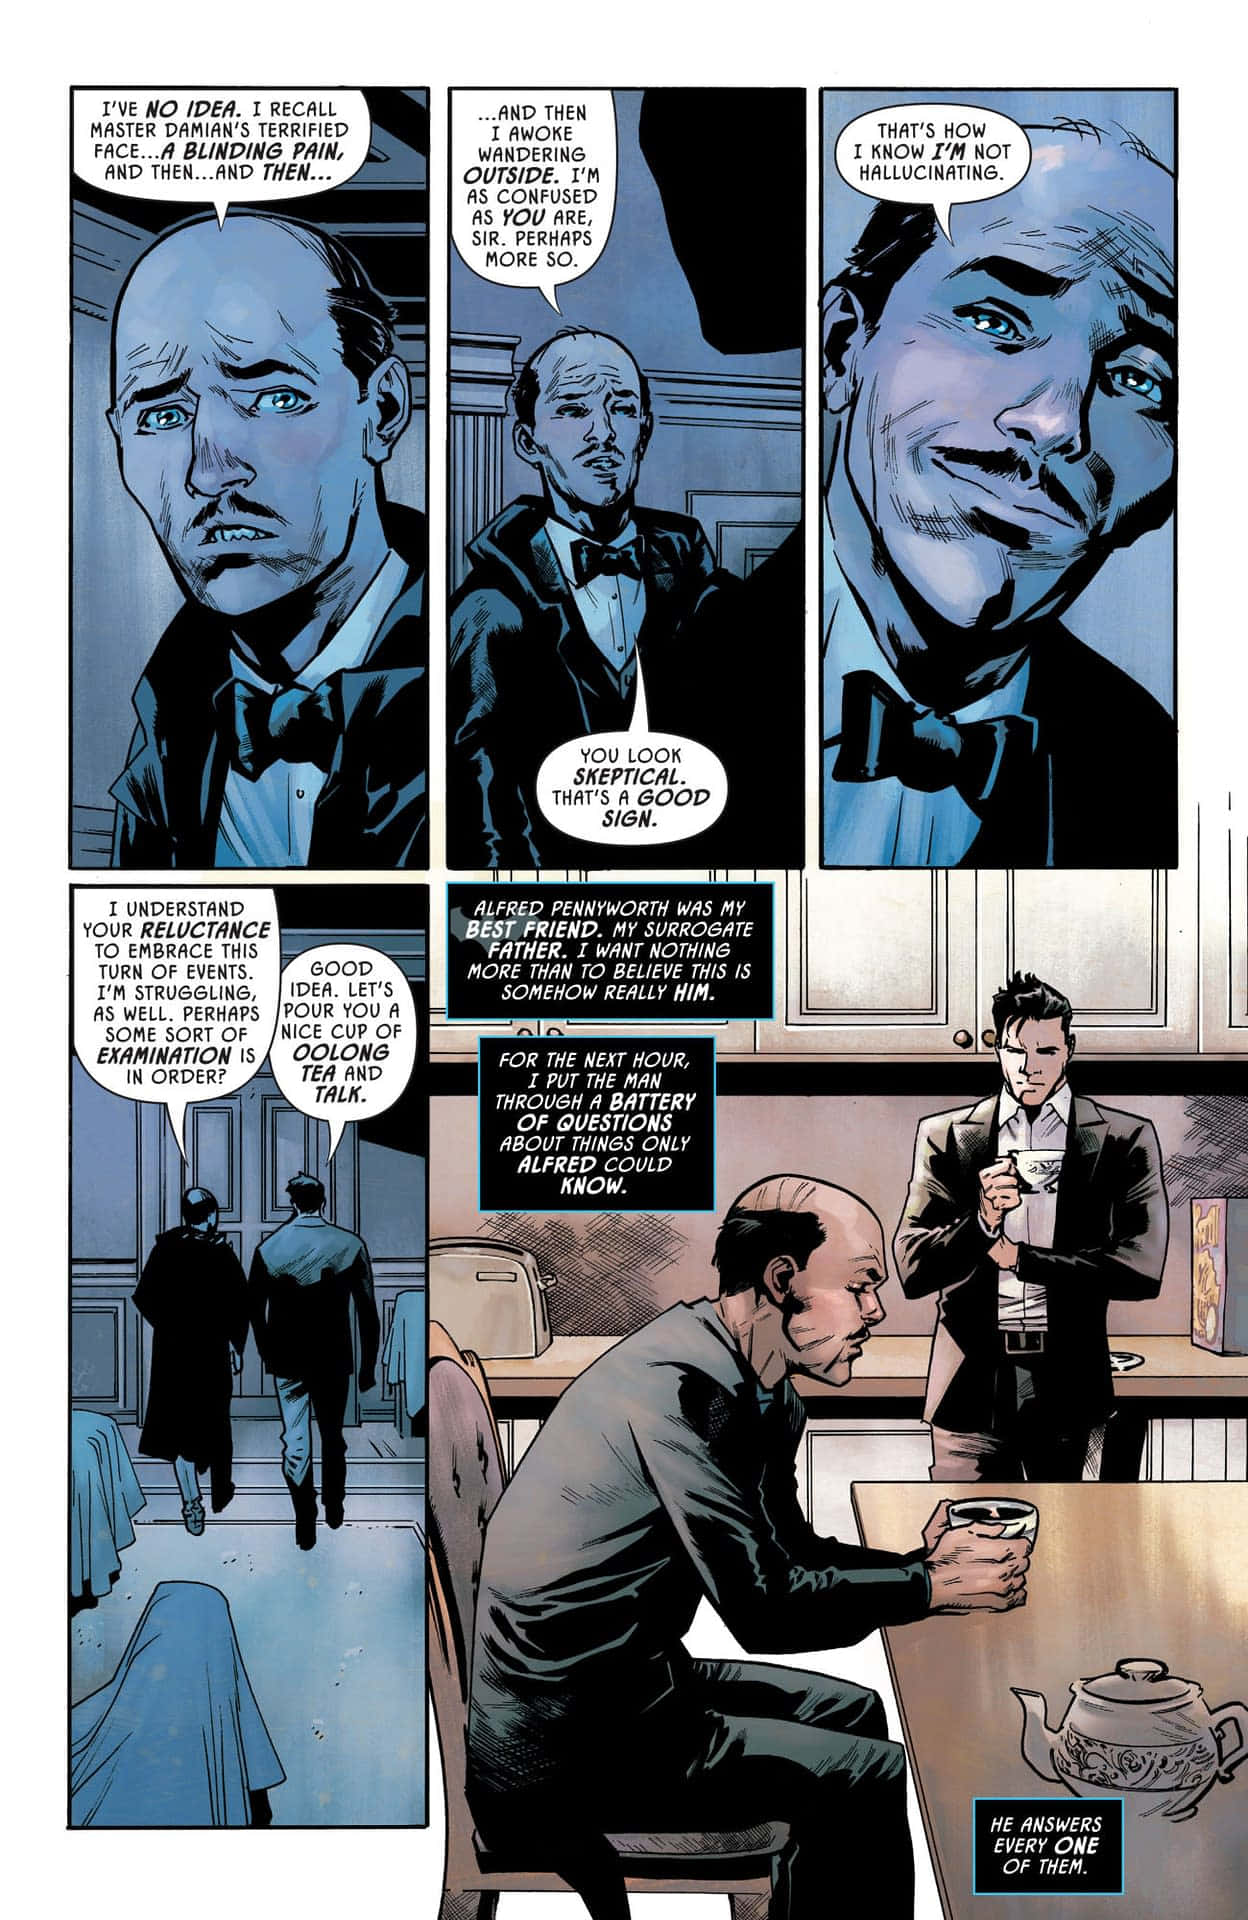 Alfred Pennyworth serving Bruce Wayne in the Batcave Wallpaper